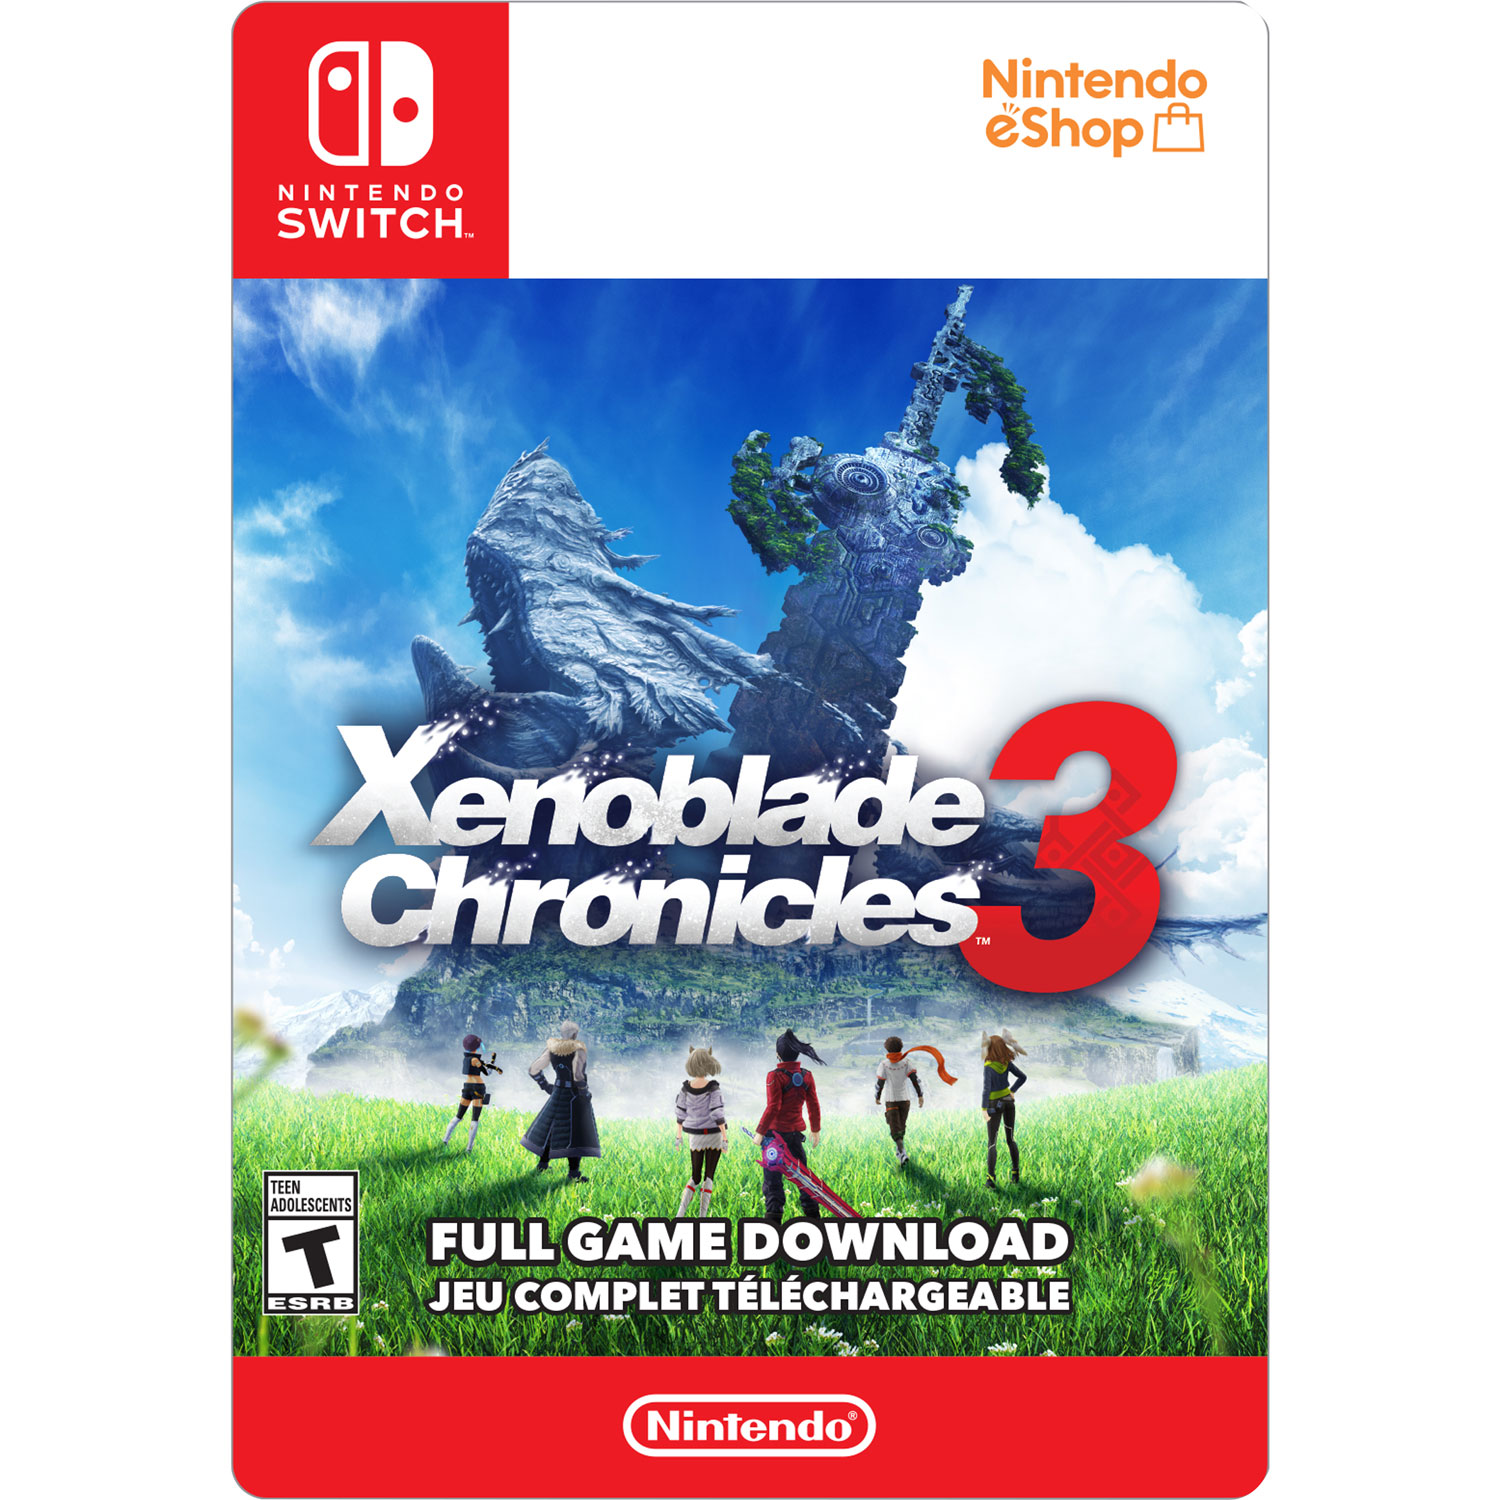 Xenoblade Chronicles 3 (Switch) - Digital Download